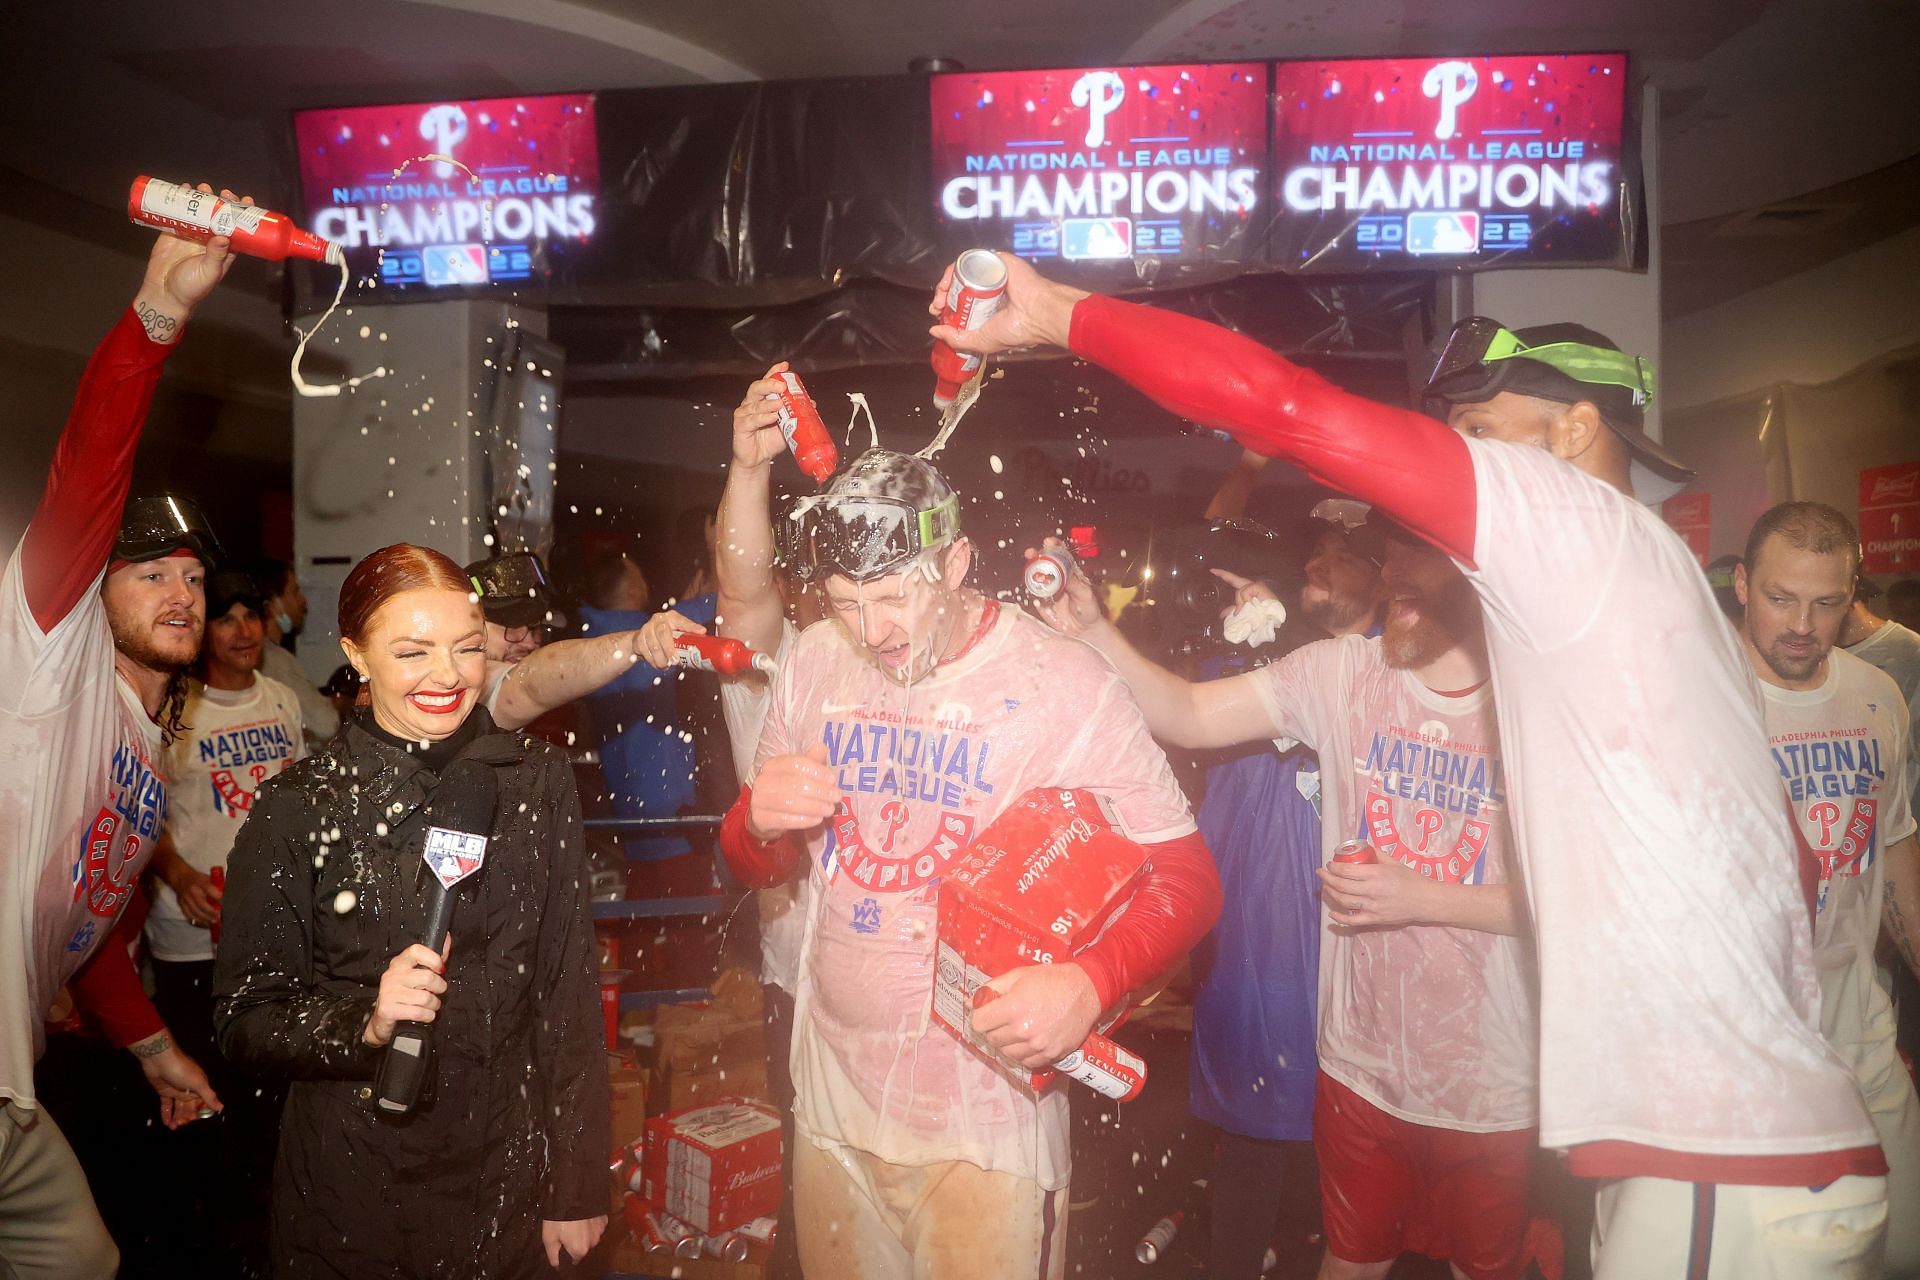 Phillies celebrate playoff series win with 'Dancing On My Own